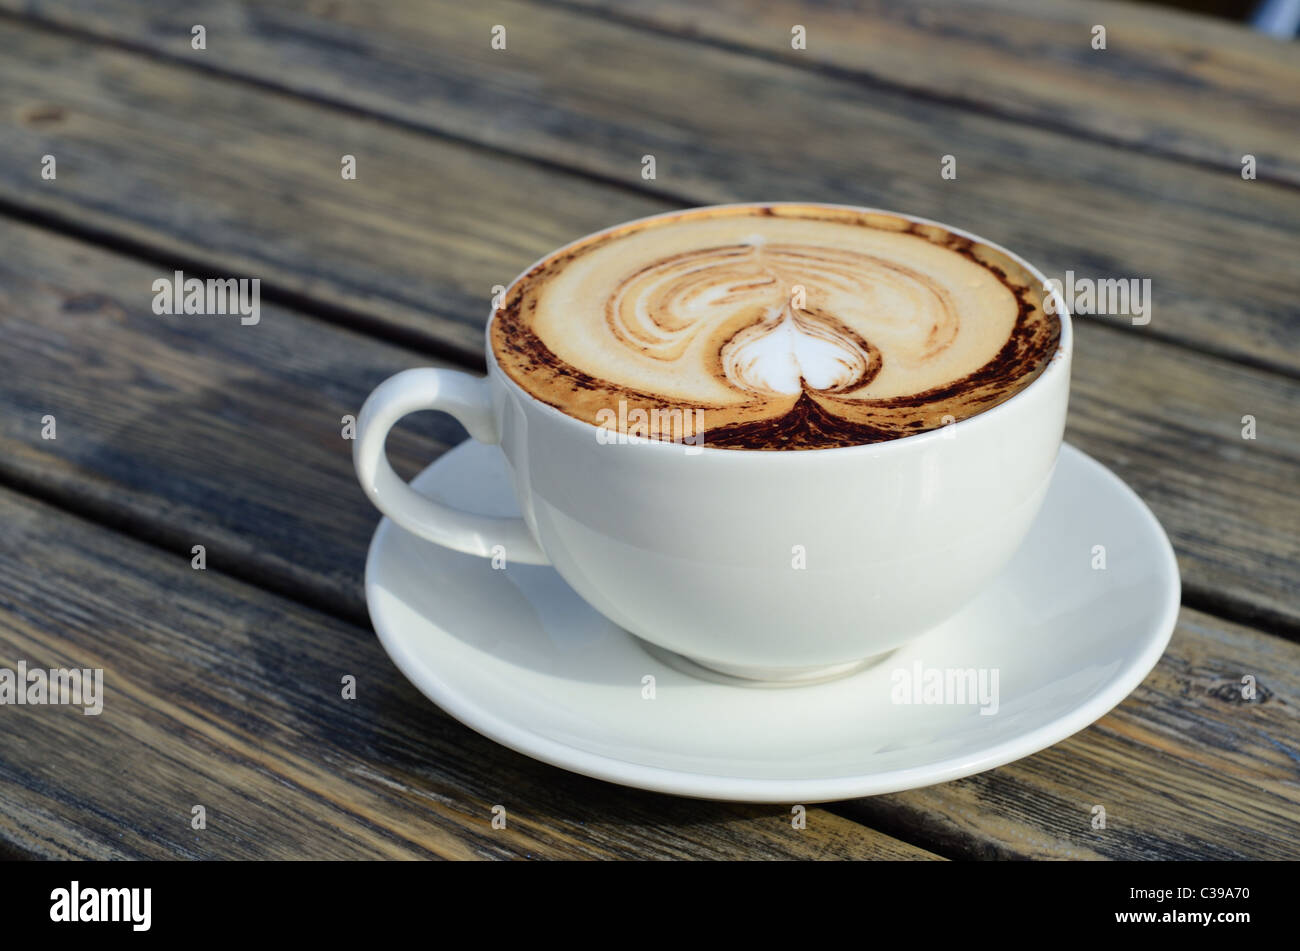 A close up of a large Cappuccino in a white cup on a weathered board table, with an artistic foam decoration. Stock Photo